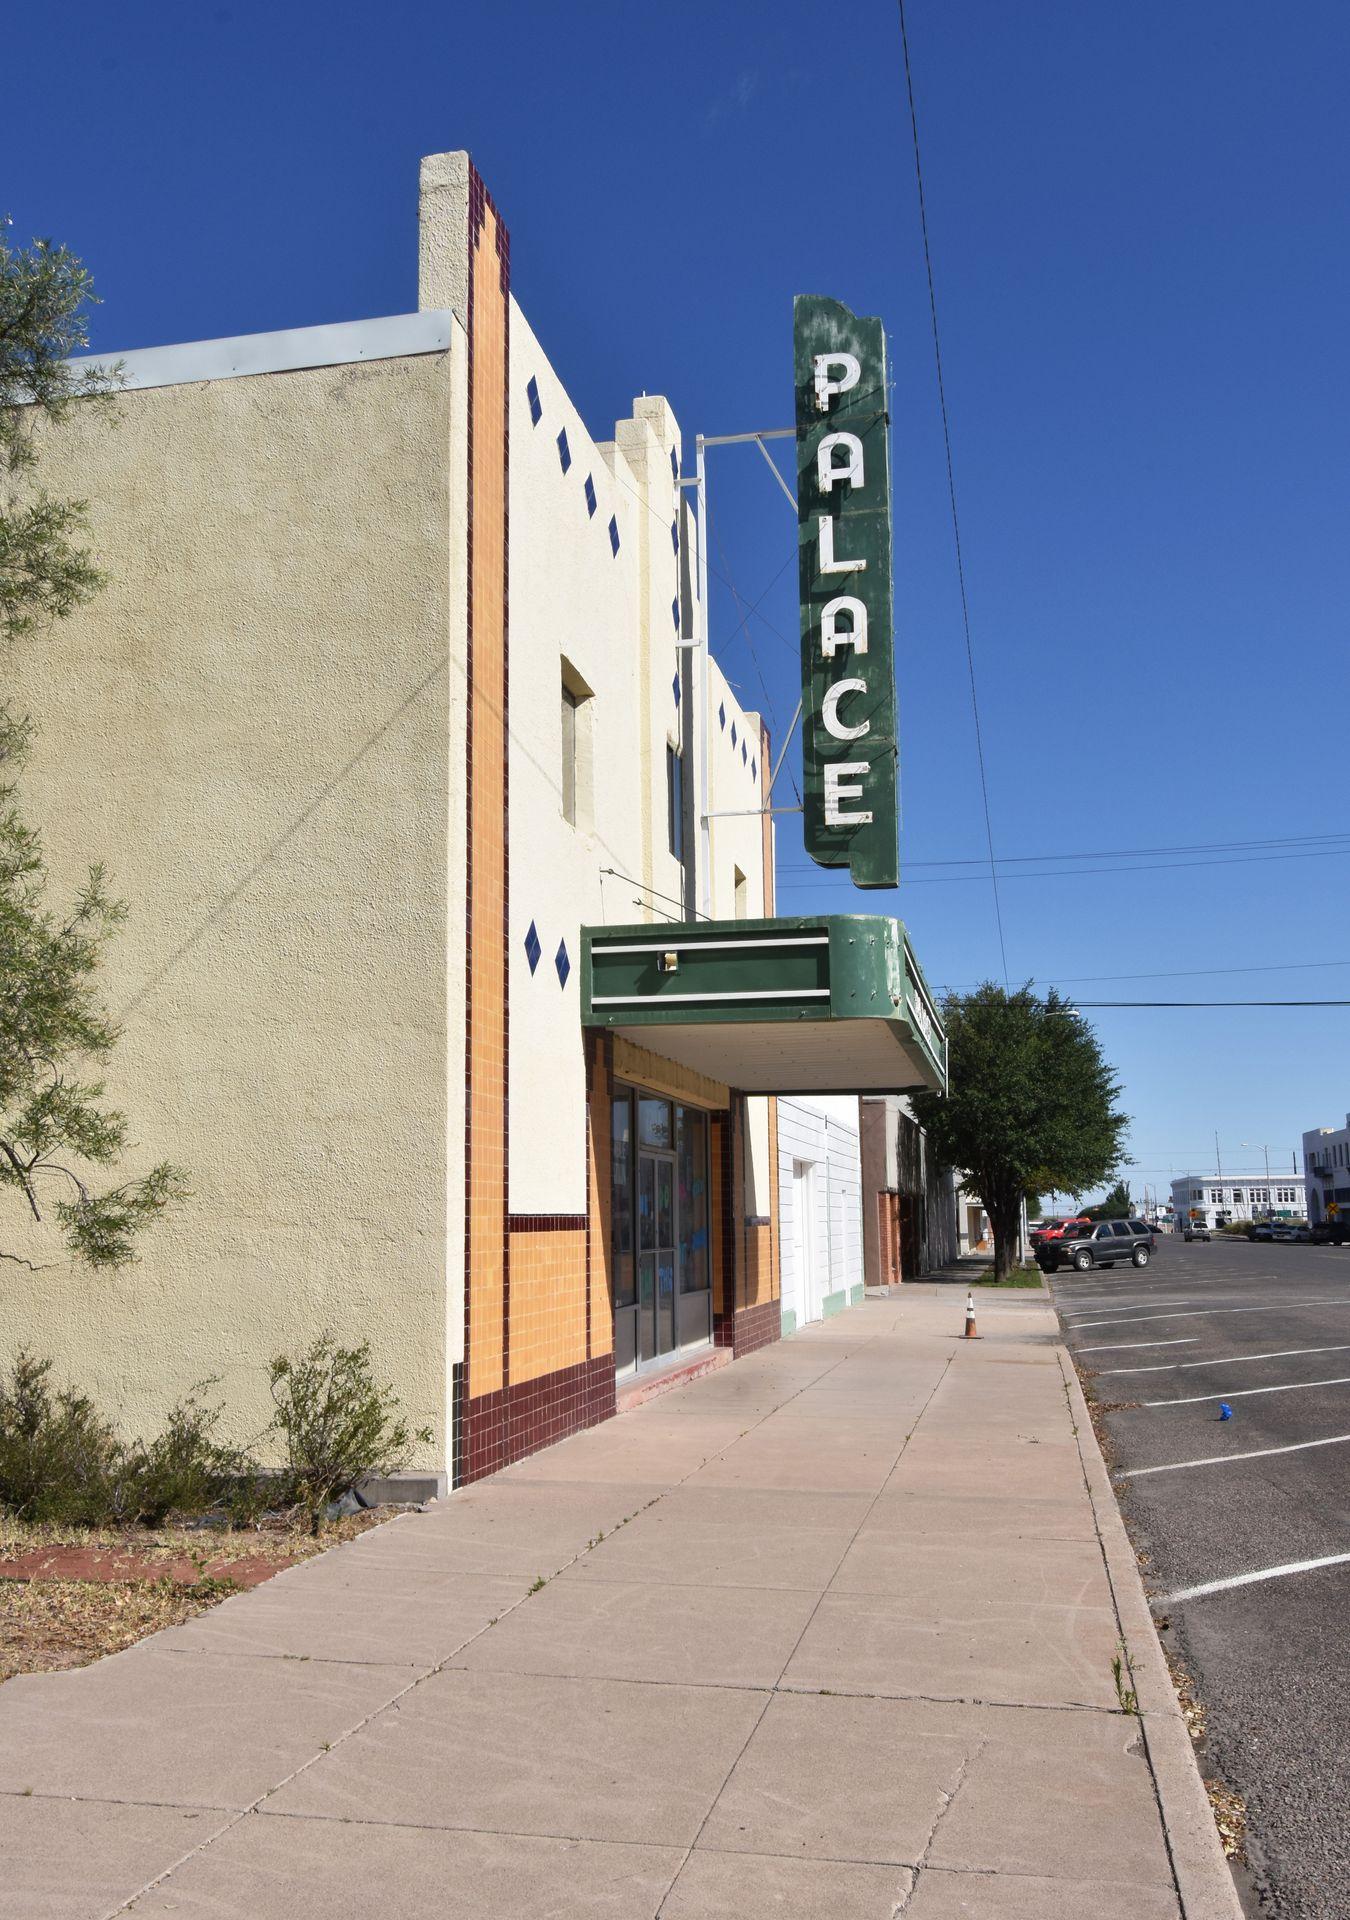 The Palace Theater in Marfa. Palace is written in white on a green sign.